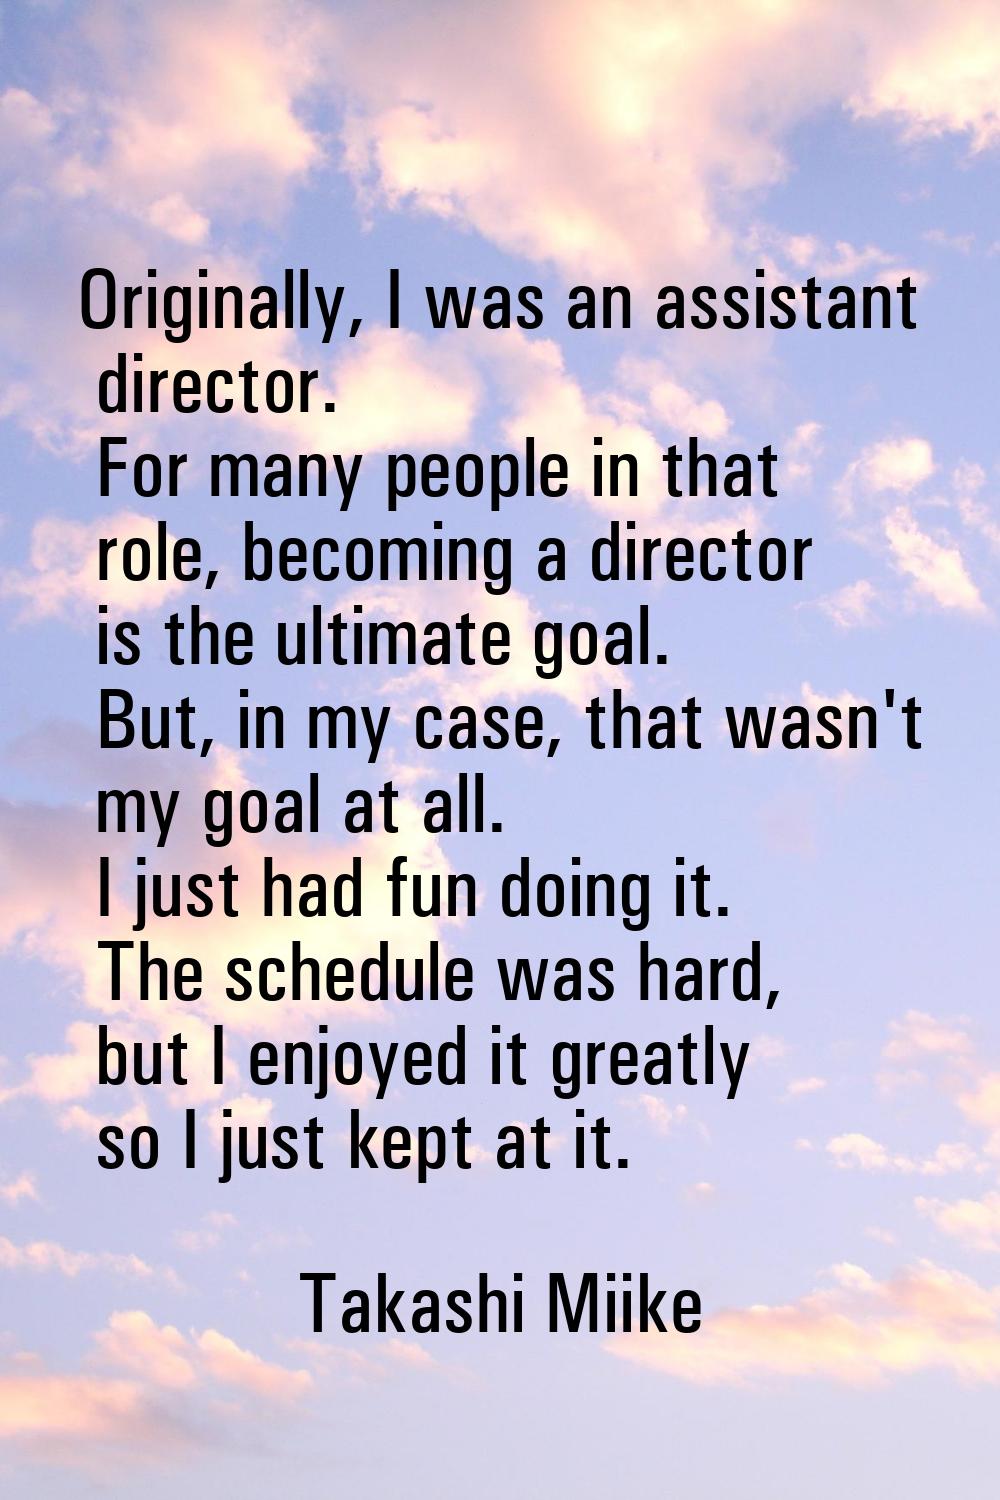 Originally, I was an assistant director. For many people in that role, becoming a director is the u